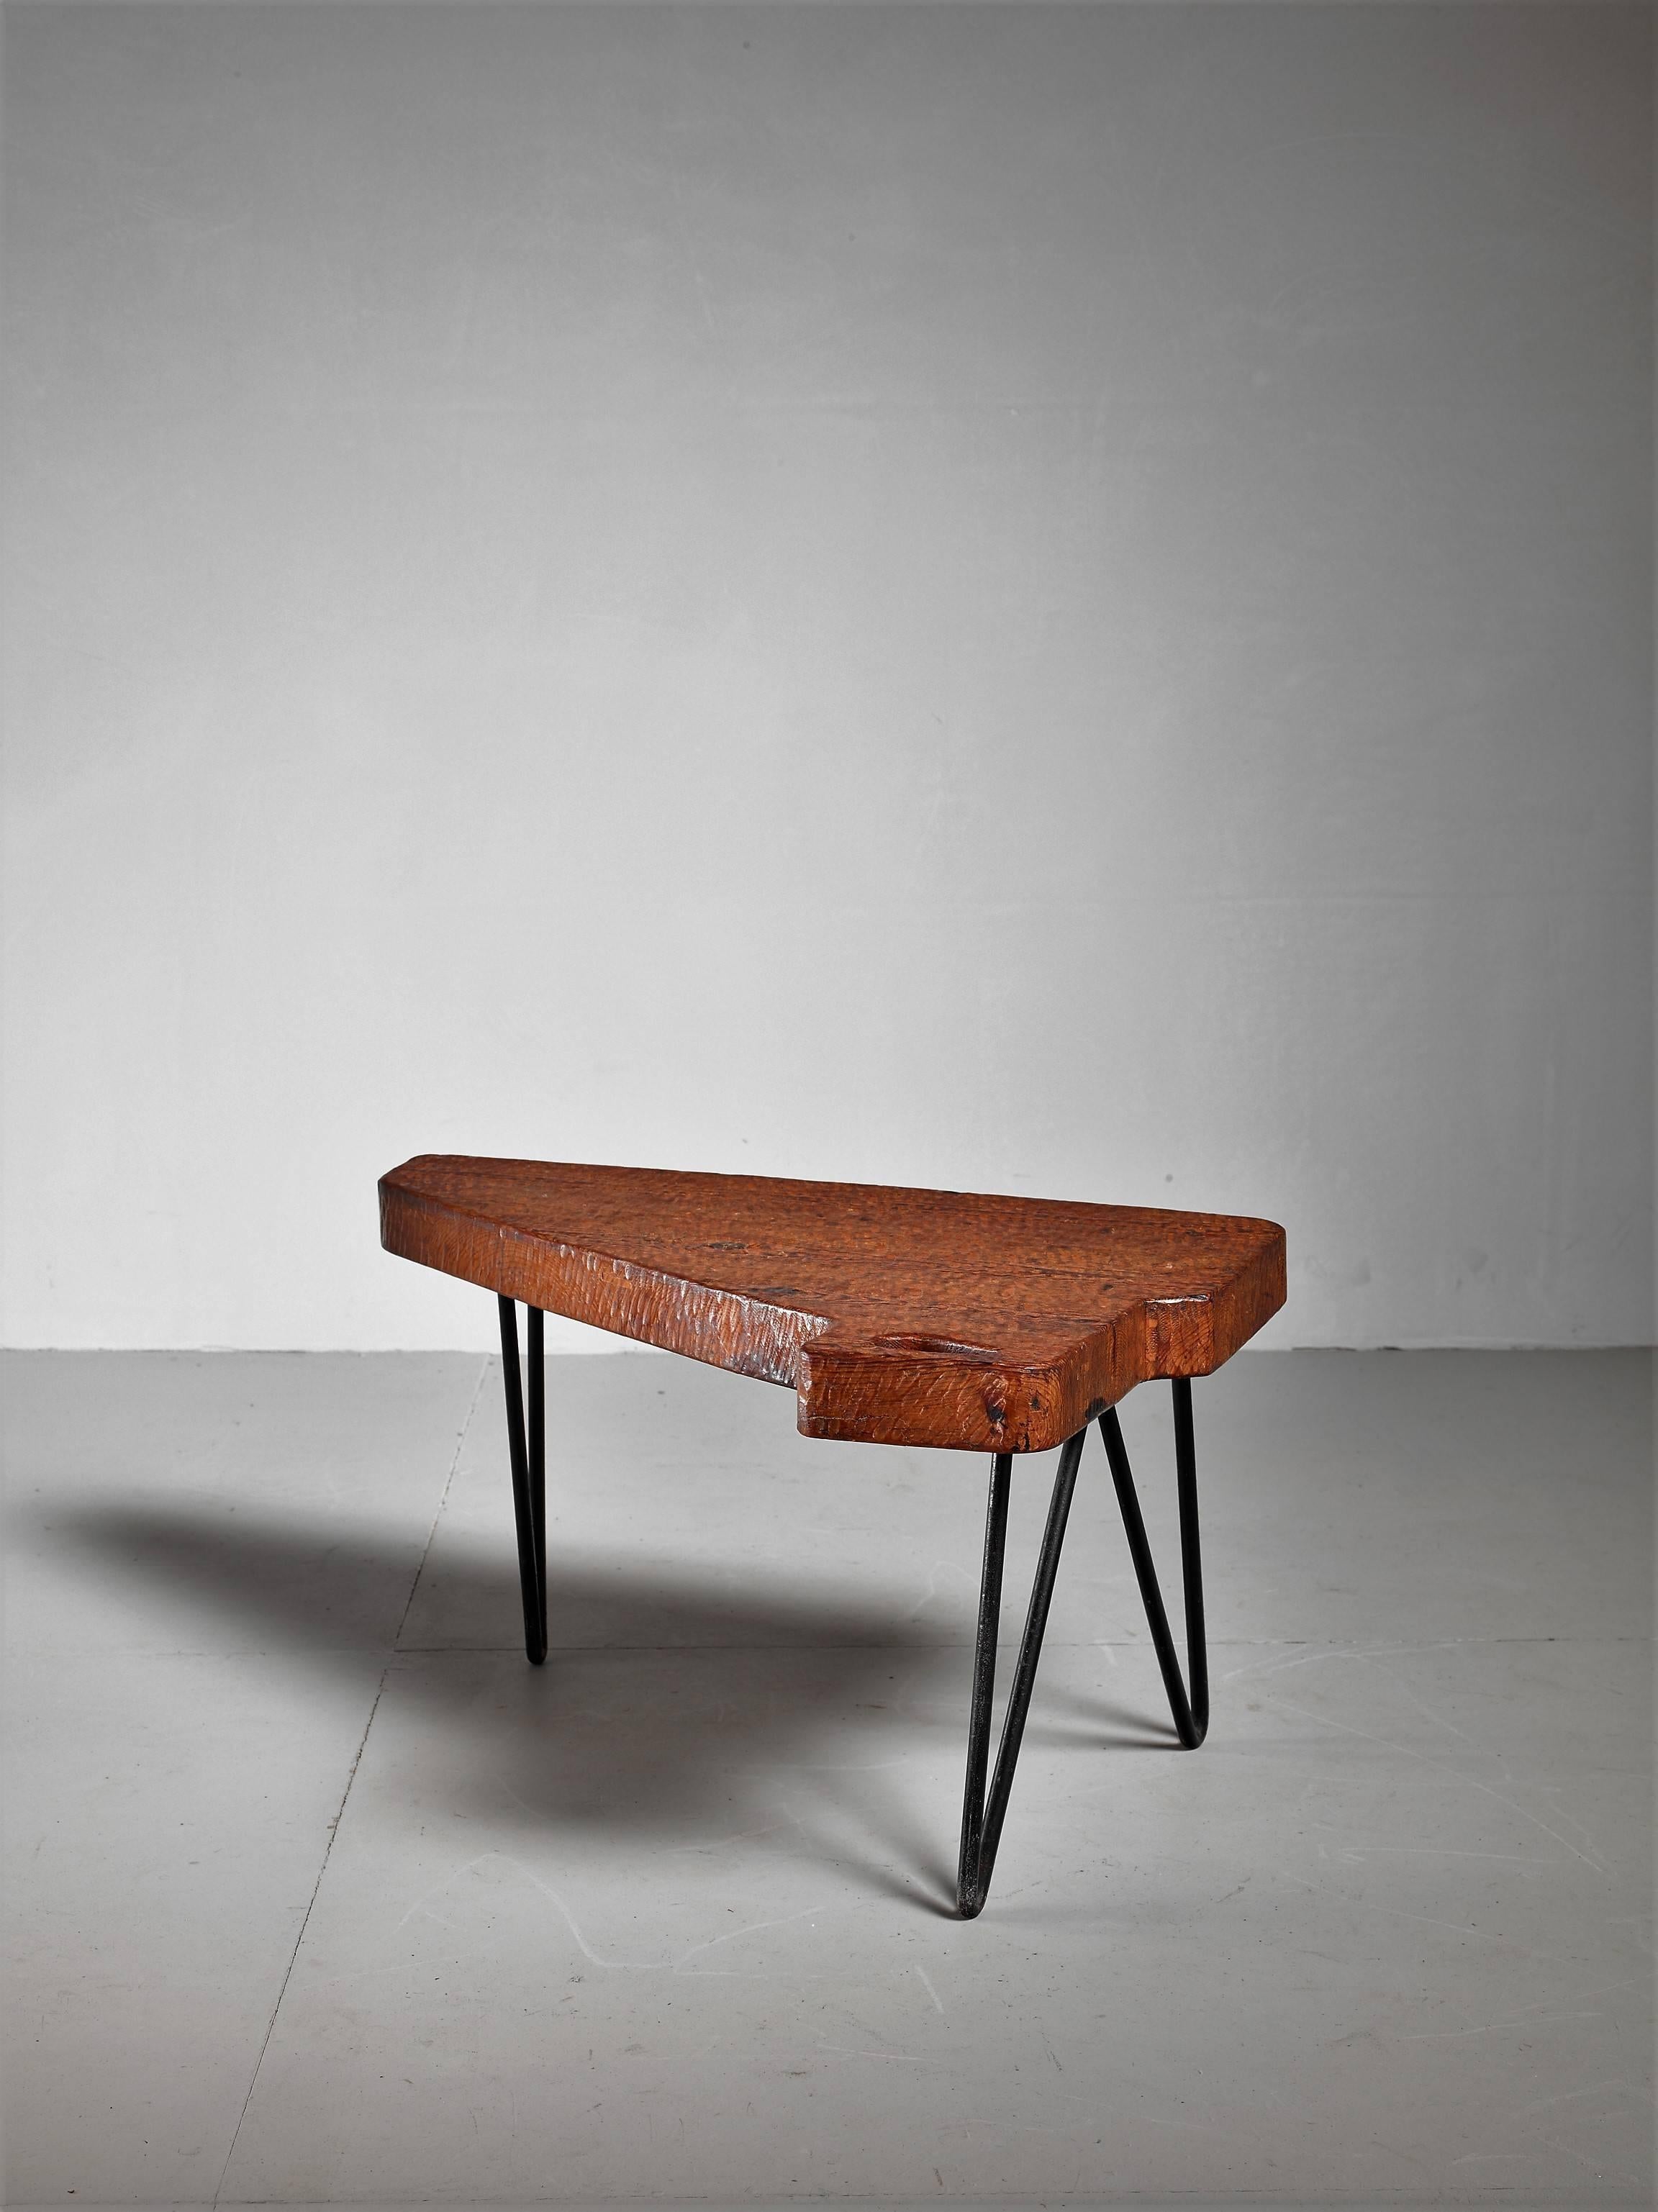 A free-form Mid-Century, Campagne style coffee table from France. The table is made of an iron frame with a thick stained pine top with an opening.
